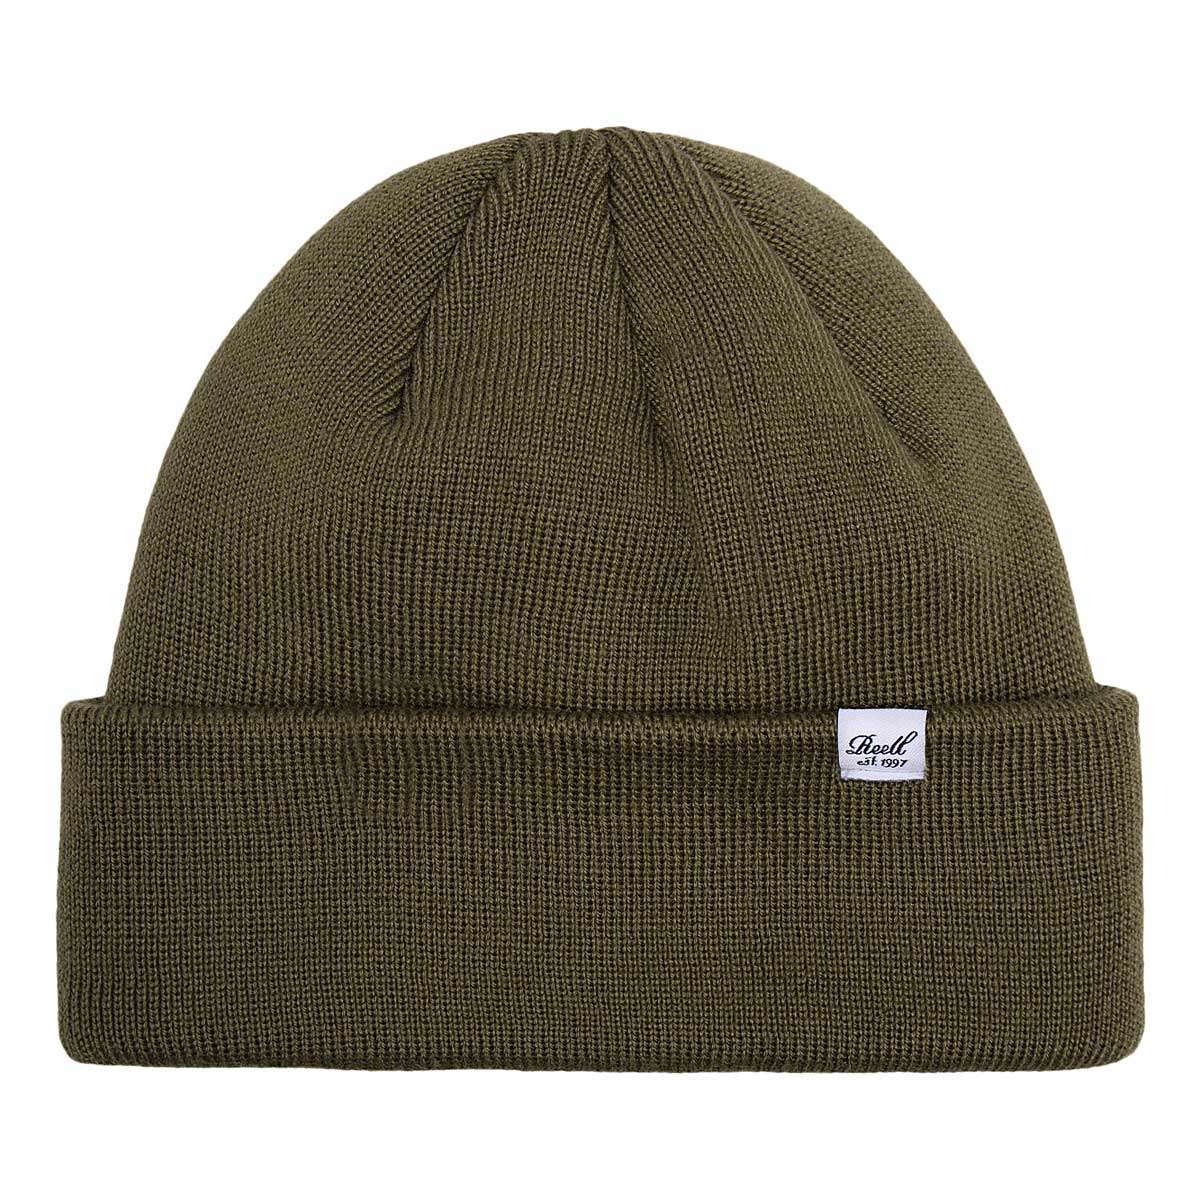 Image of Reell Beanie, Olive